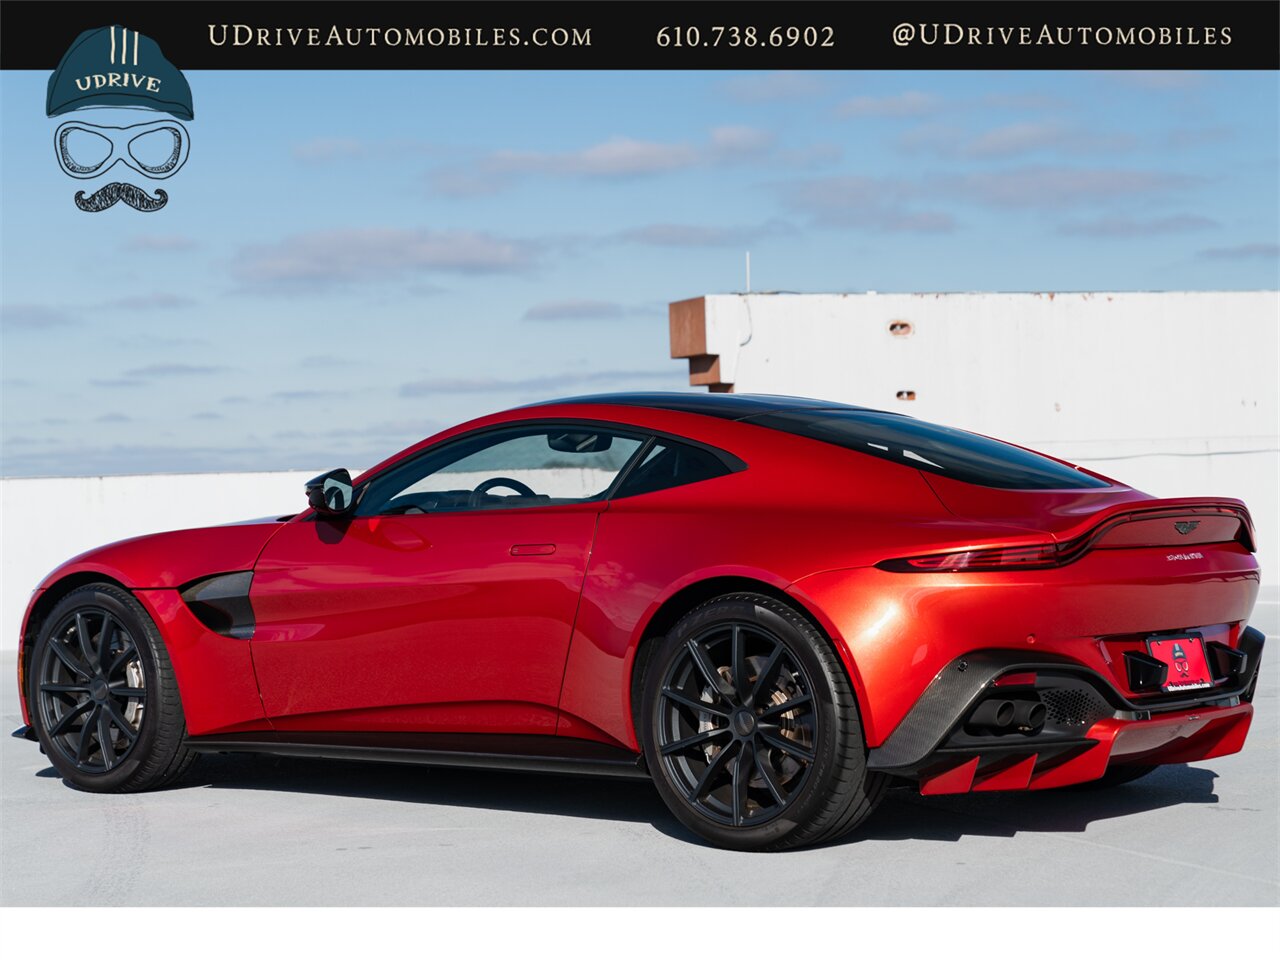 2019 Aston Martin Vantage  Incredibly Spec Rare Q Exclusive Fiamma Red $222k MSRP 1 of a Kind CPO - Photo 27 - West Chester, PA 19382